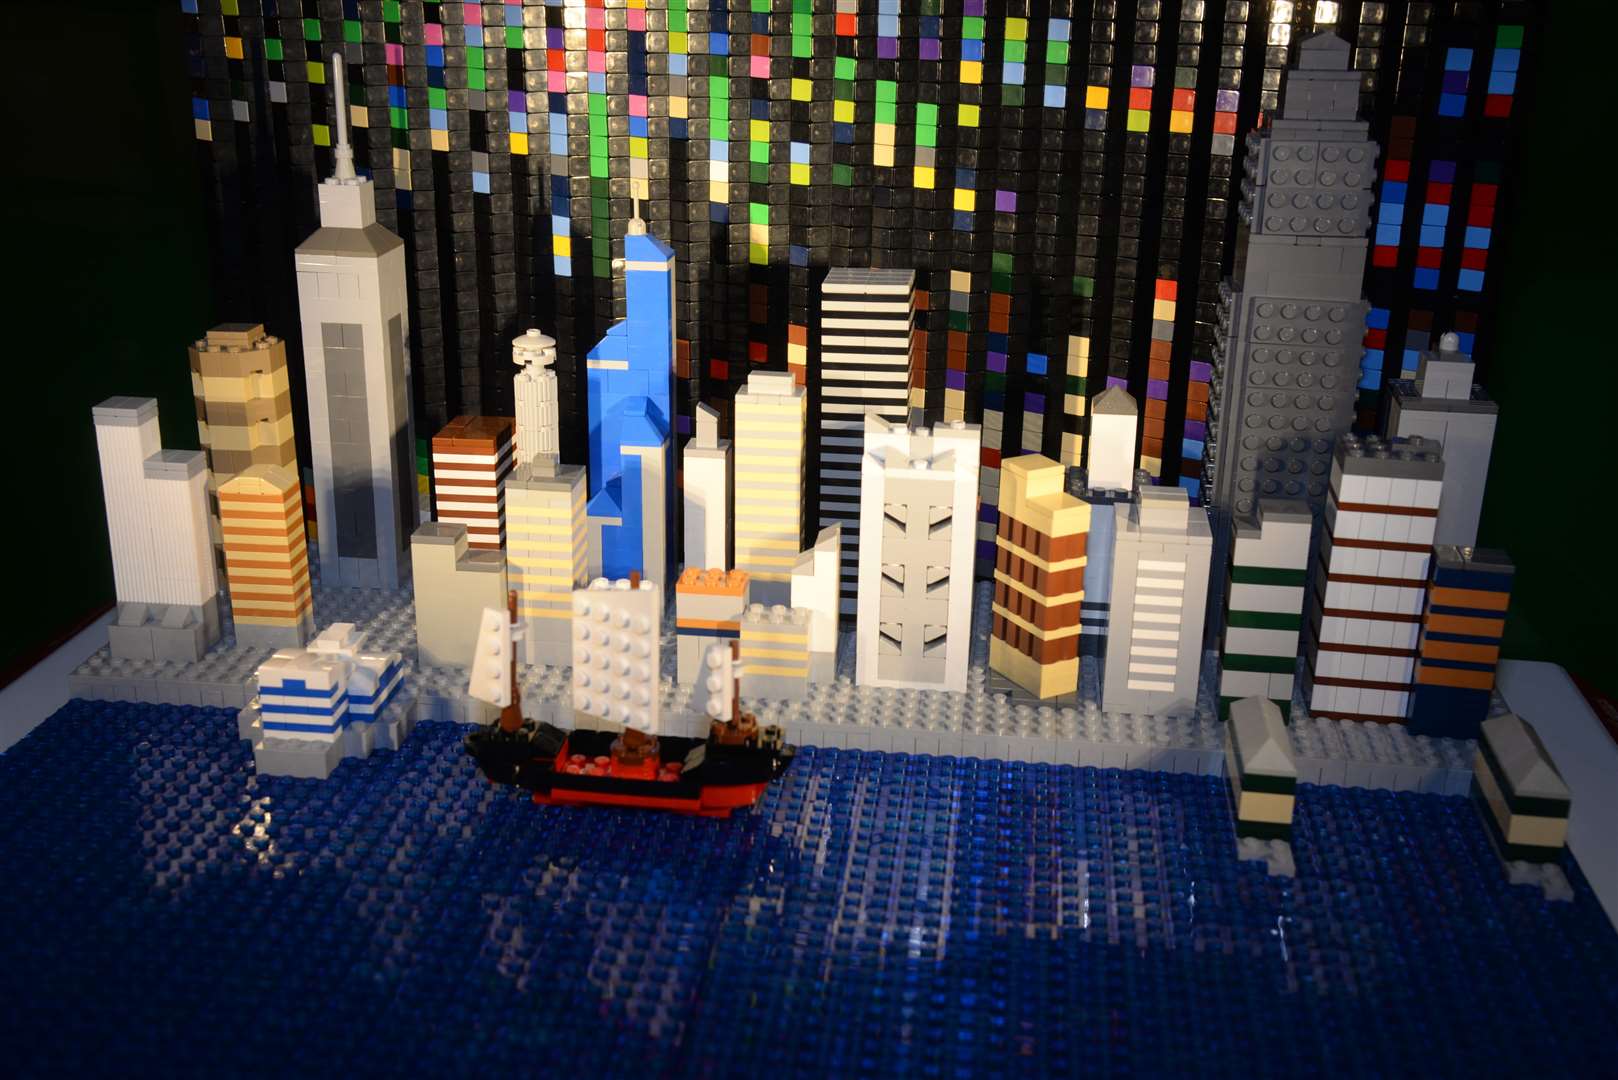 The LEGO model of Hong Kong at the exhibition at Chatham Historic Dockyard in 2018. Picture: Chris Davey